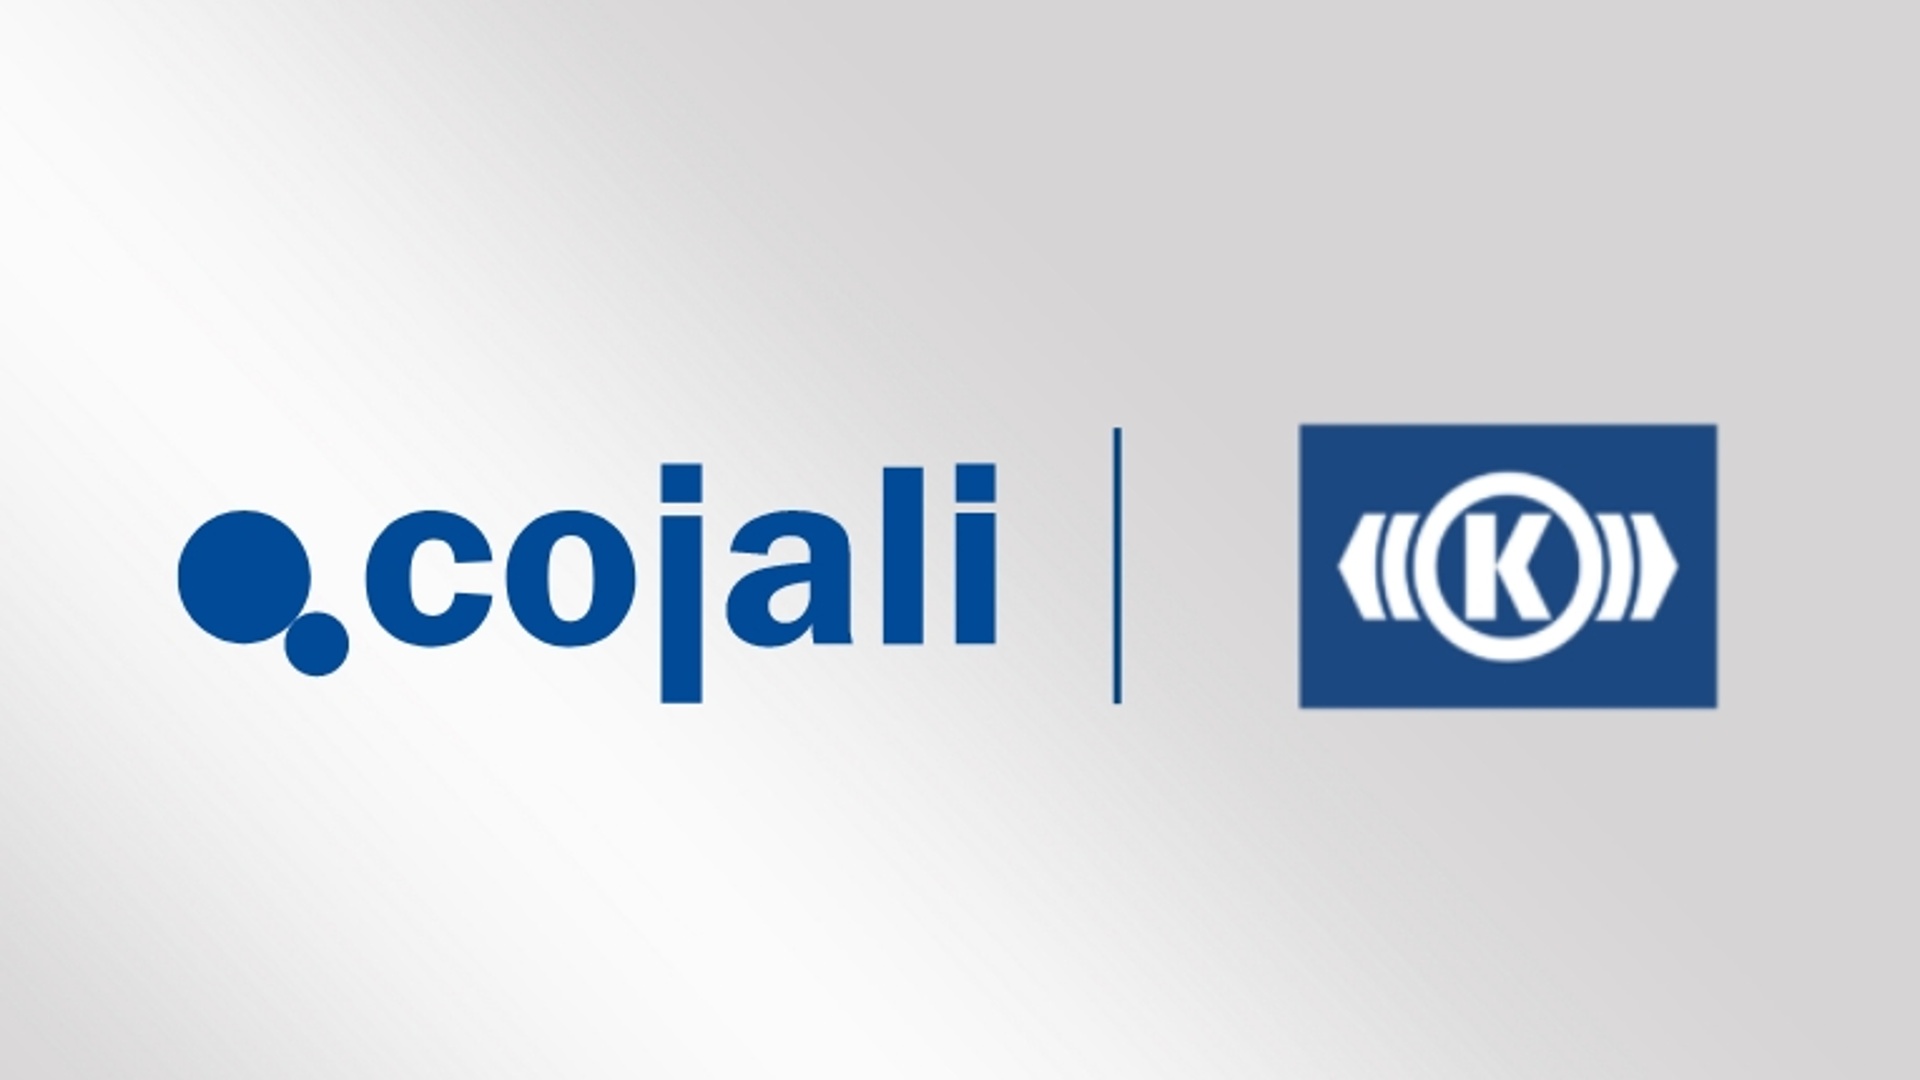 The two company logos of Cojali and Knorr-Bremse stand side by side on a gray background.